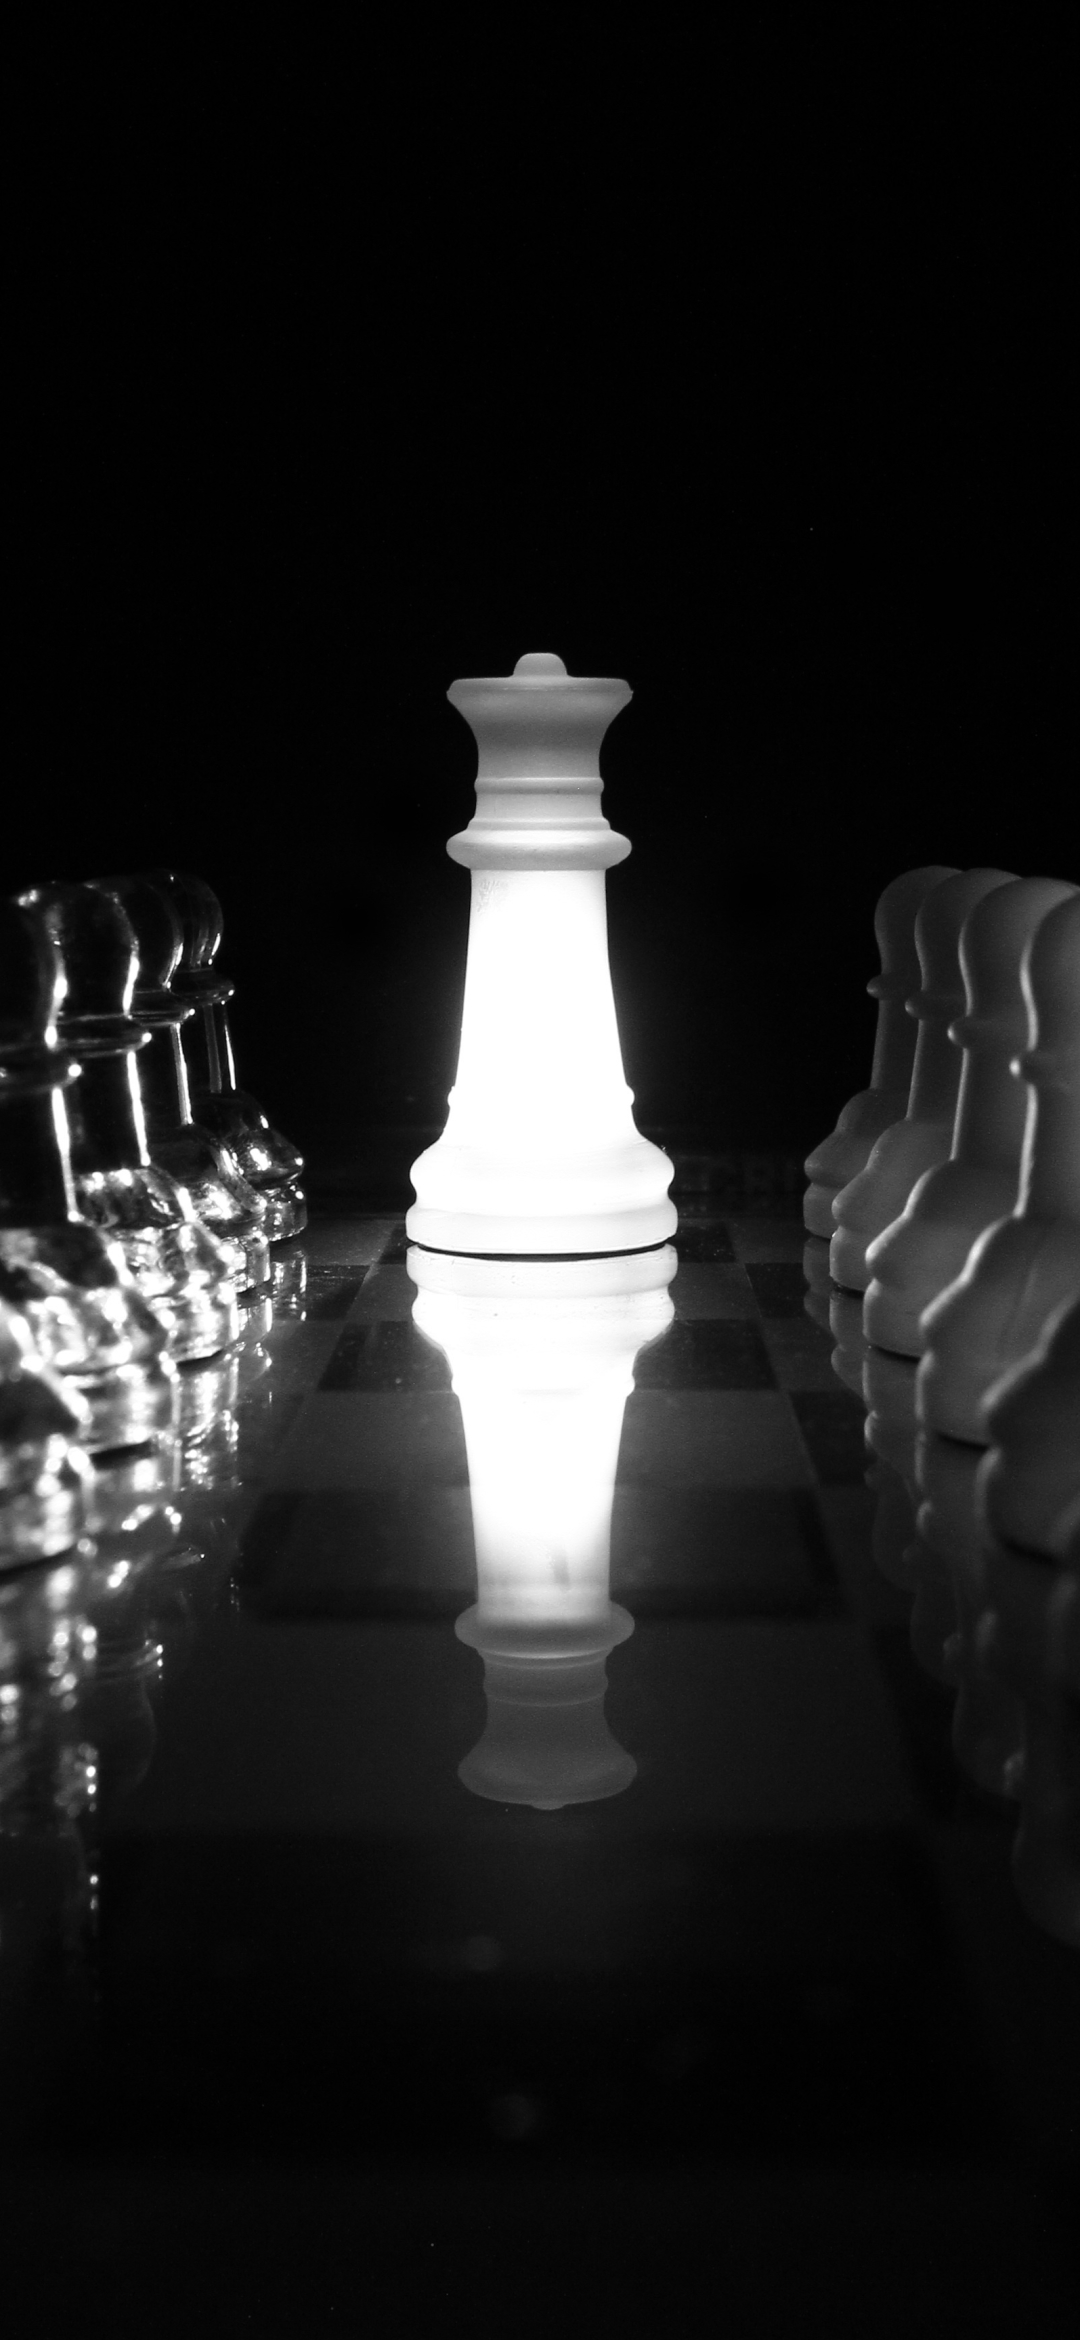 Chess Wallpapers - Top Free Chess Backgrounds - WallpaperAccess